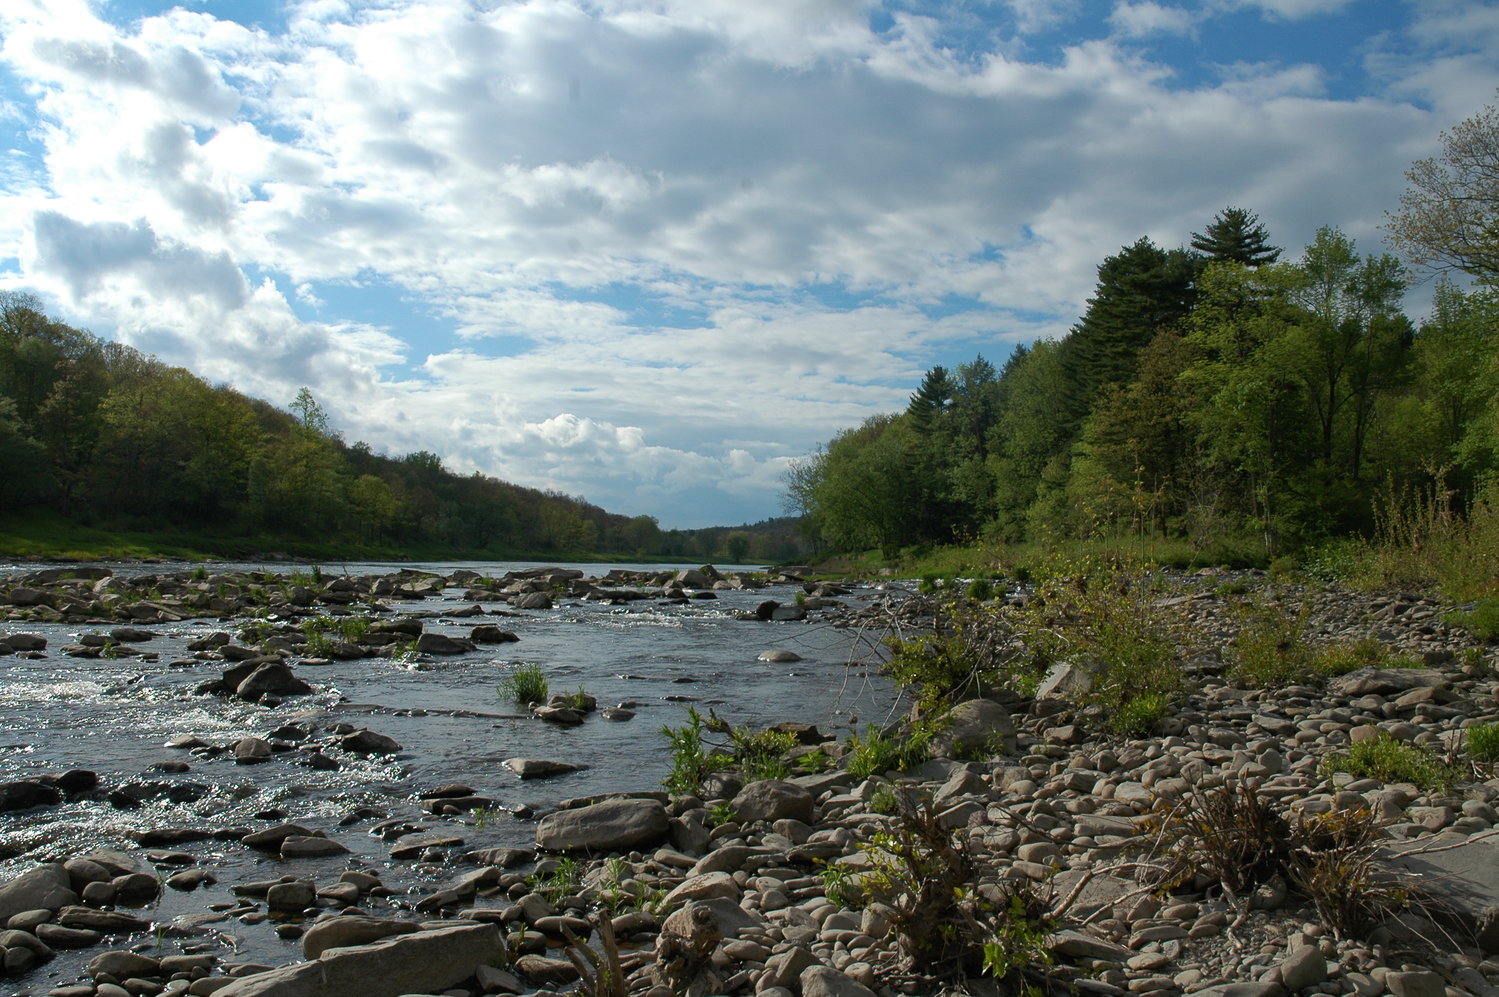 “To put your hands in a river is to feel the cords that bind the earth together,” wrote Barry Lopez, recipient of the National Book Award in 1986 for his nonfiction work, “Arctic Dreams.” Many who live in or visit the Delaware River region have been inspired by a similar sense of kinship with this iconic river.